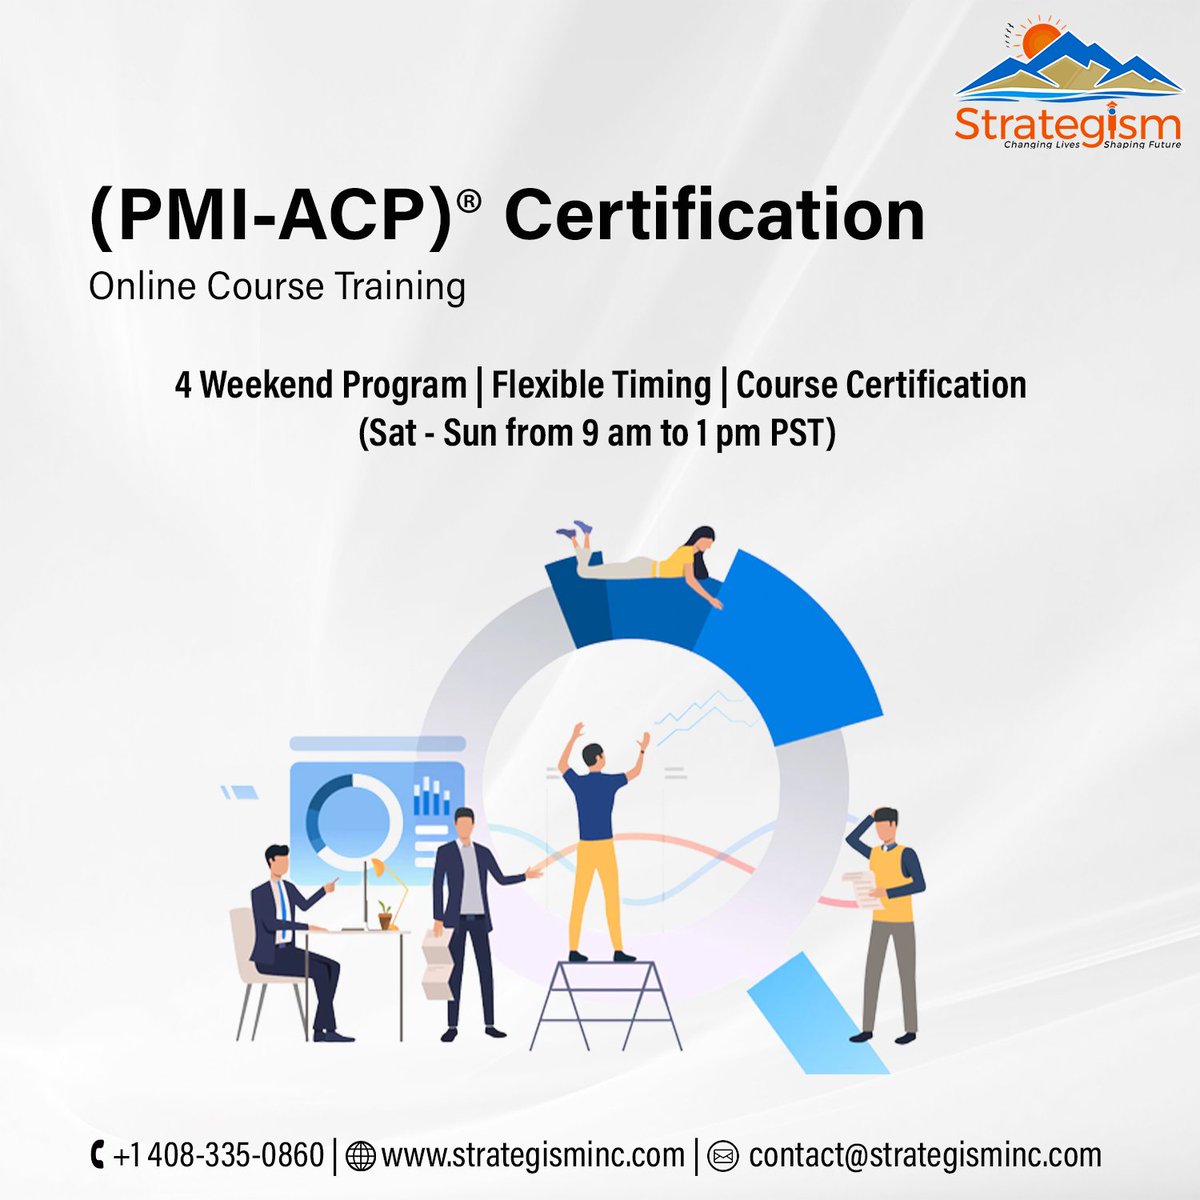 This Certification is the fastest-growing certification offered by PMI® and increases the versatility and employability of candidates who are successful in achieving this certification.
👇
Enroll Now:
☎ +1 408-335-0860
:
#PMP #Agile #eLearning #Training #USA #OnlineCertification